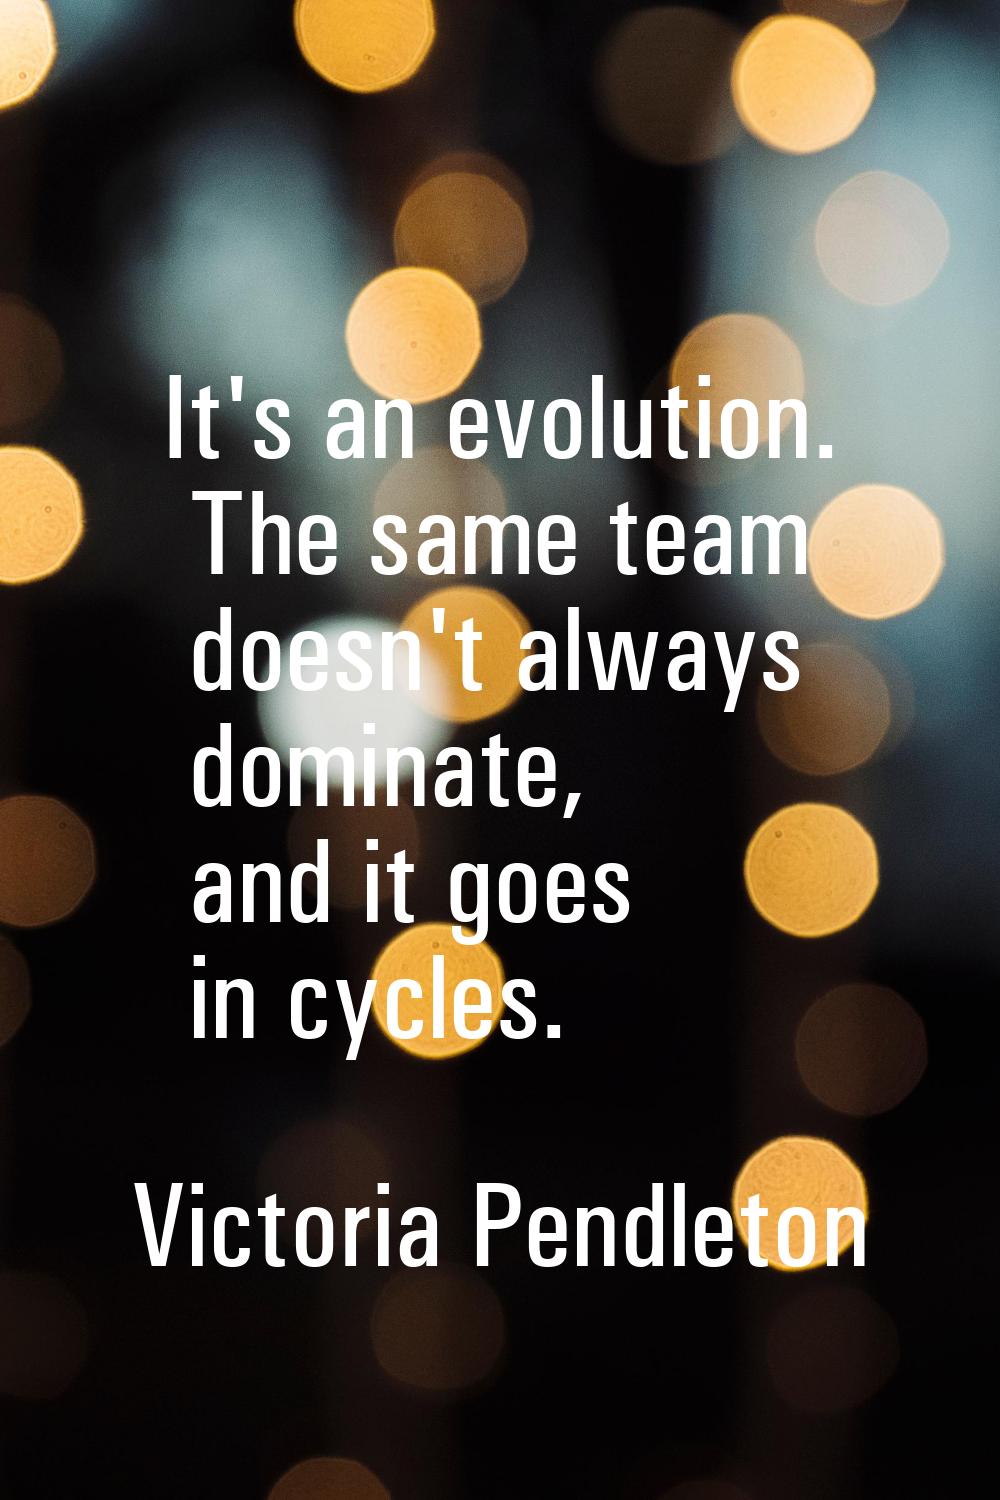 It's an evolution. The same team doesn't always dominate, and it goes in cycles.